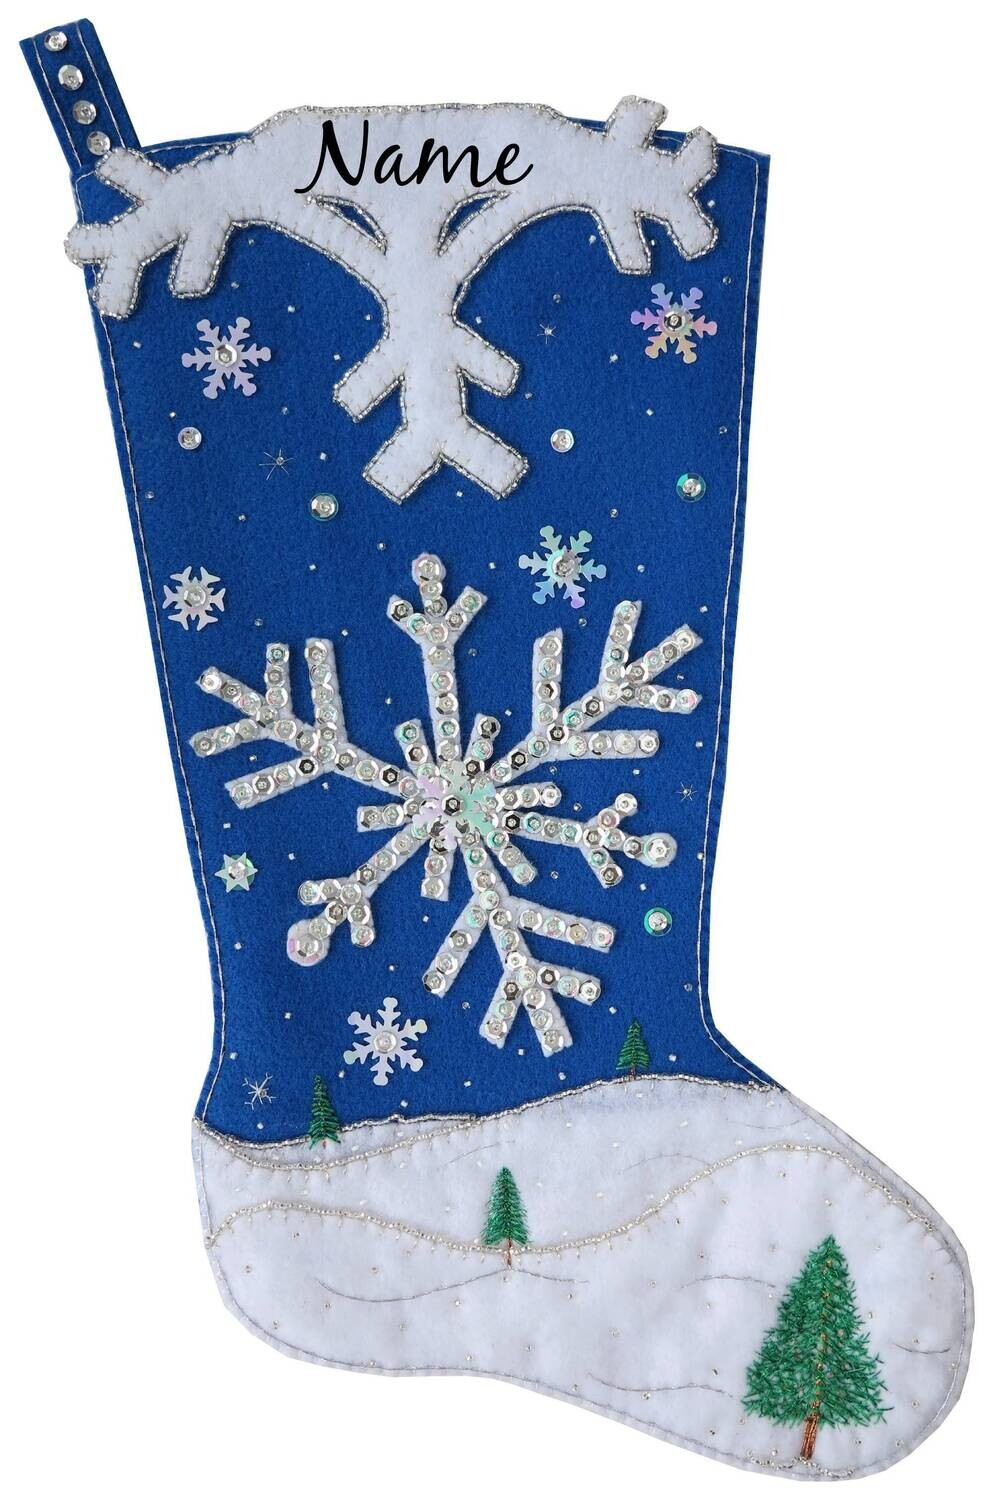 Christmas stockings with sequins - personalized